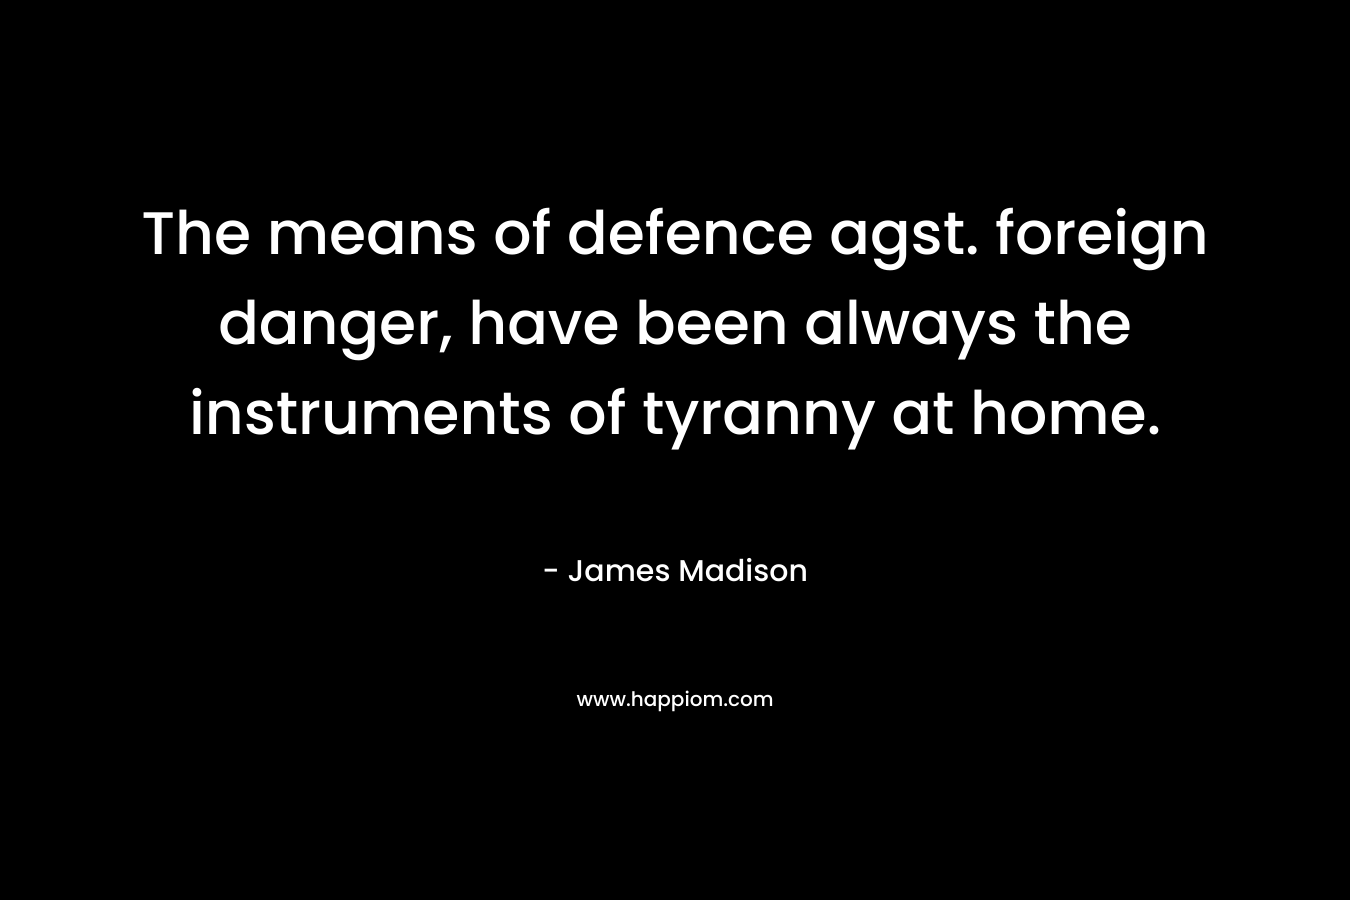 The means of defence agst. foreign danger, have been always the instruments of tyranny at home. – James Madison